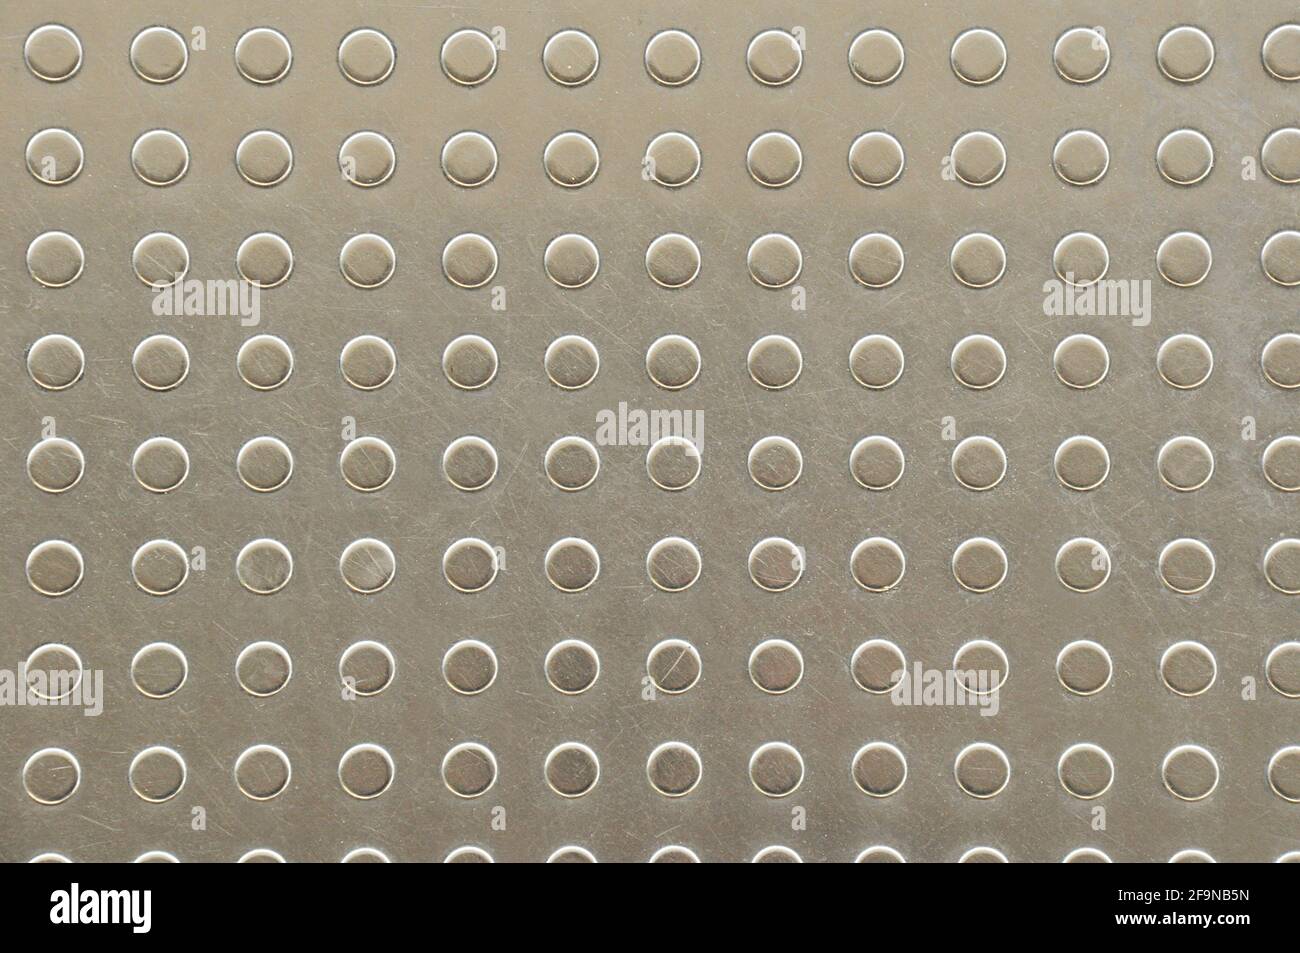 Dots on metal plate as tactile paving or signal for blind people on footpath or platform Stock Photo